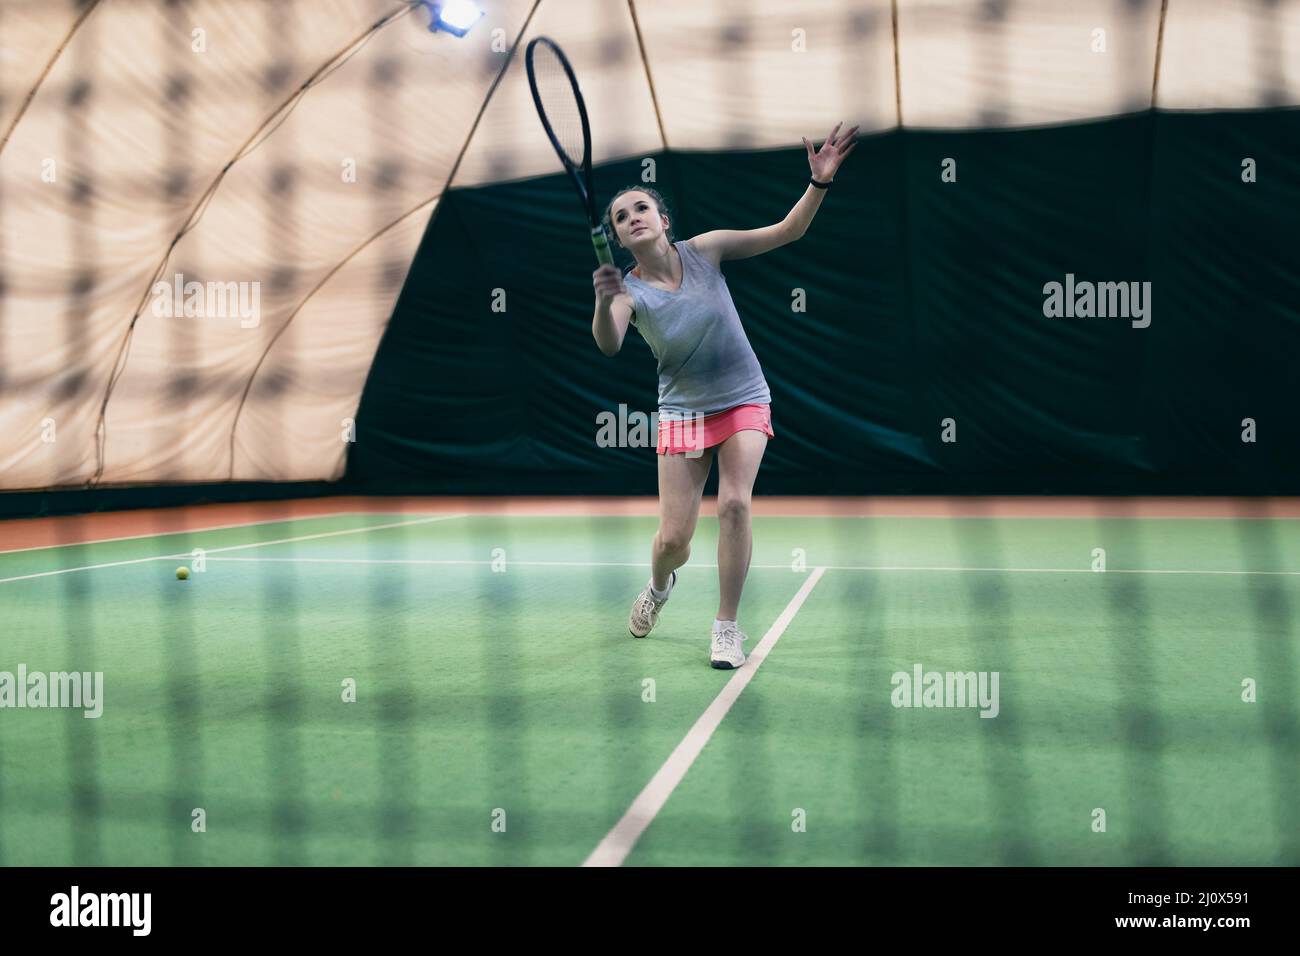 Tennis woman player playing training with racket and ball at court Stock Photo